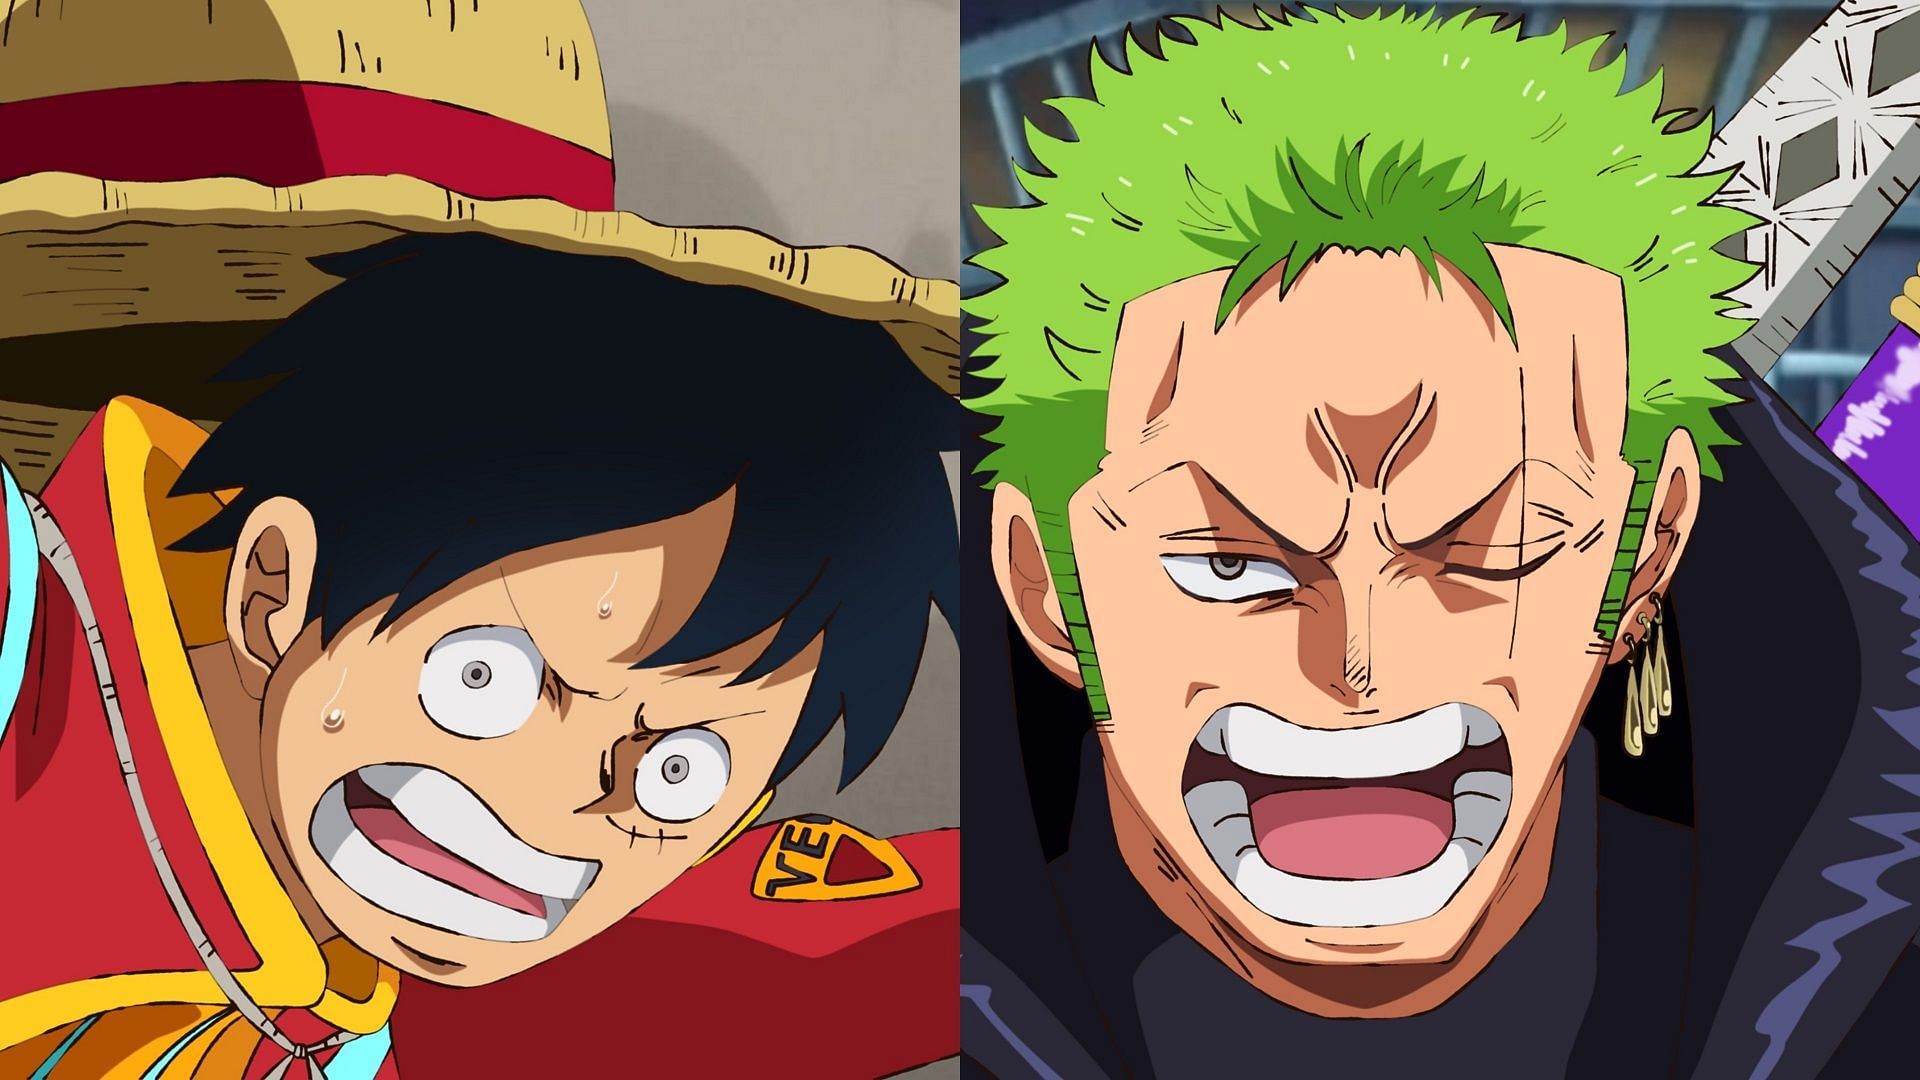 Luffy and Zoro may have found their most unexpected allies (Image via Eiichiro Oda/Shueisha, One Piece)